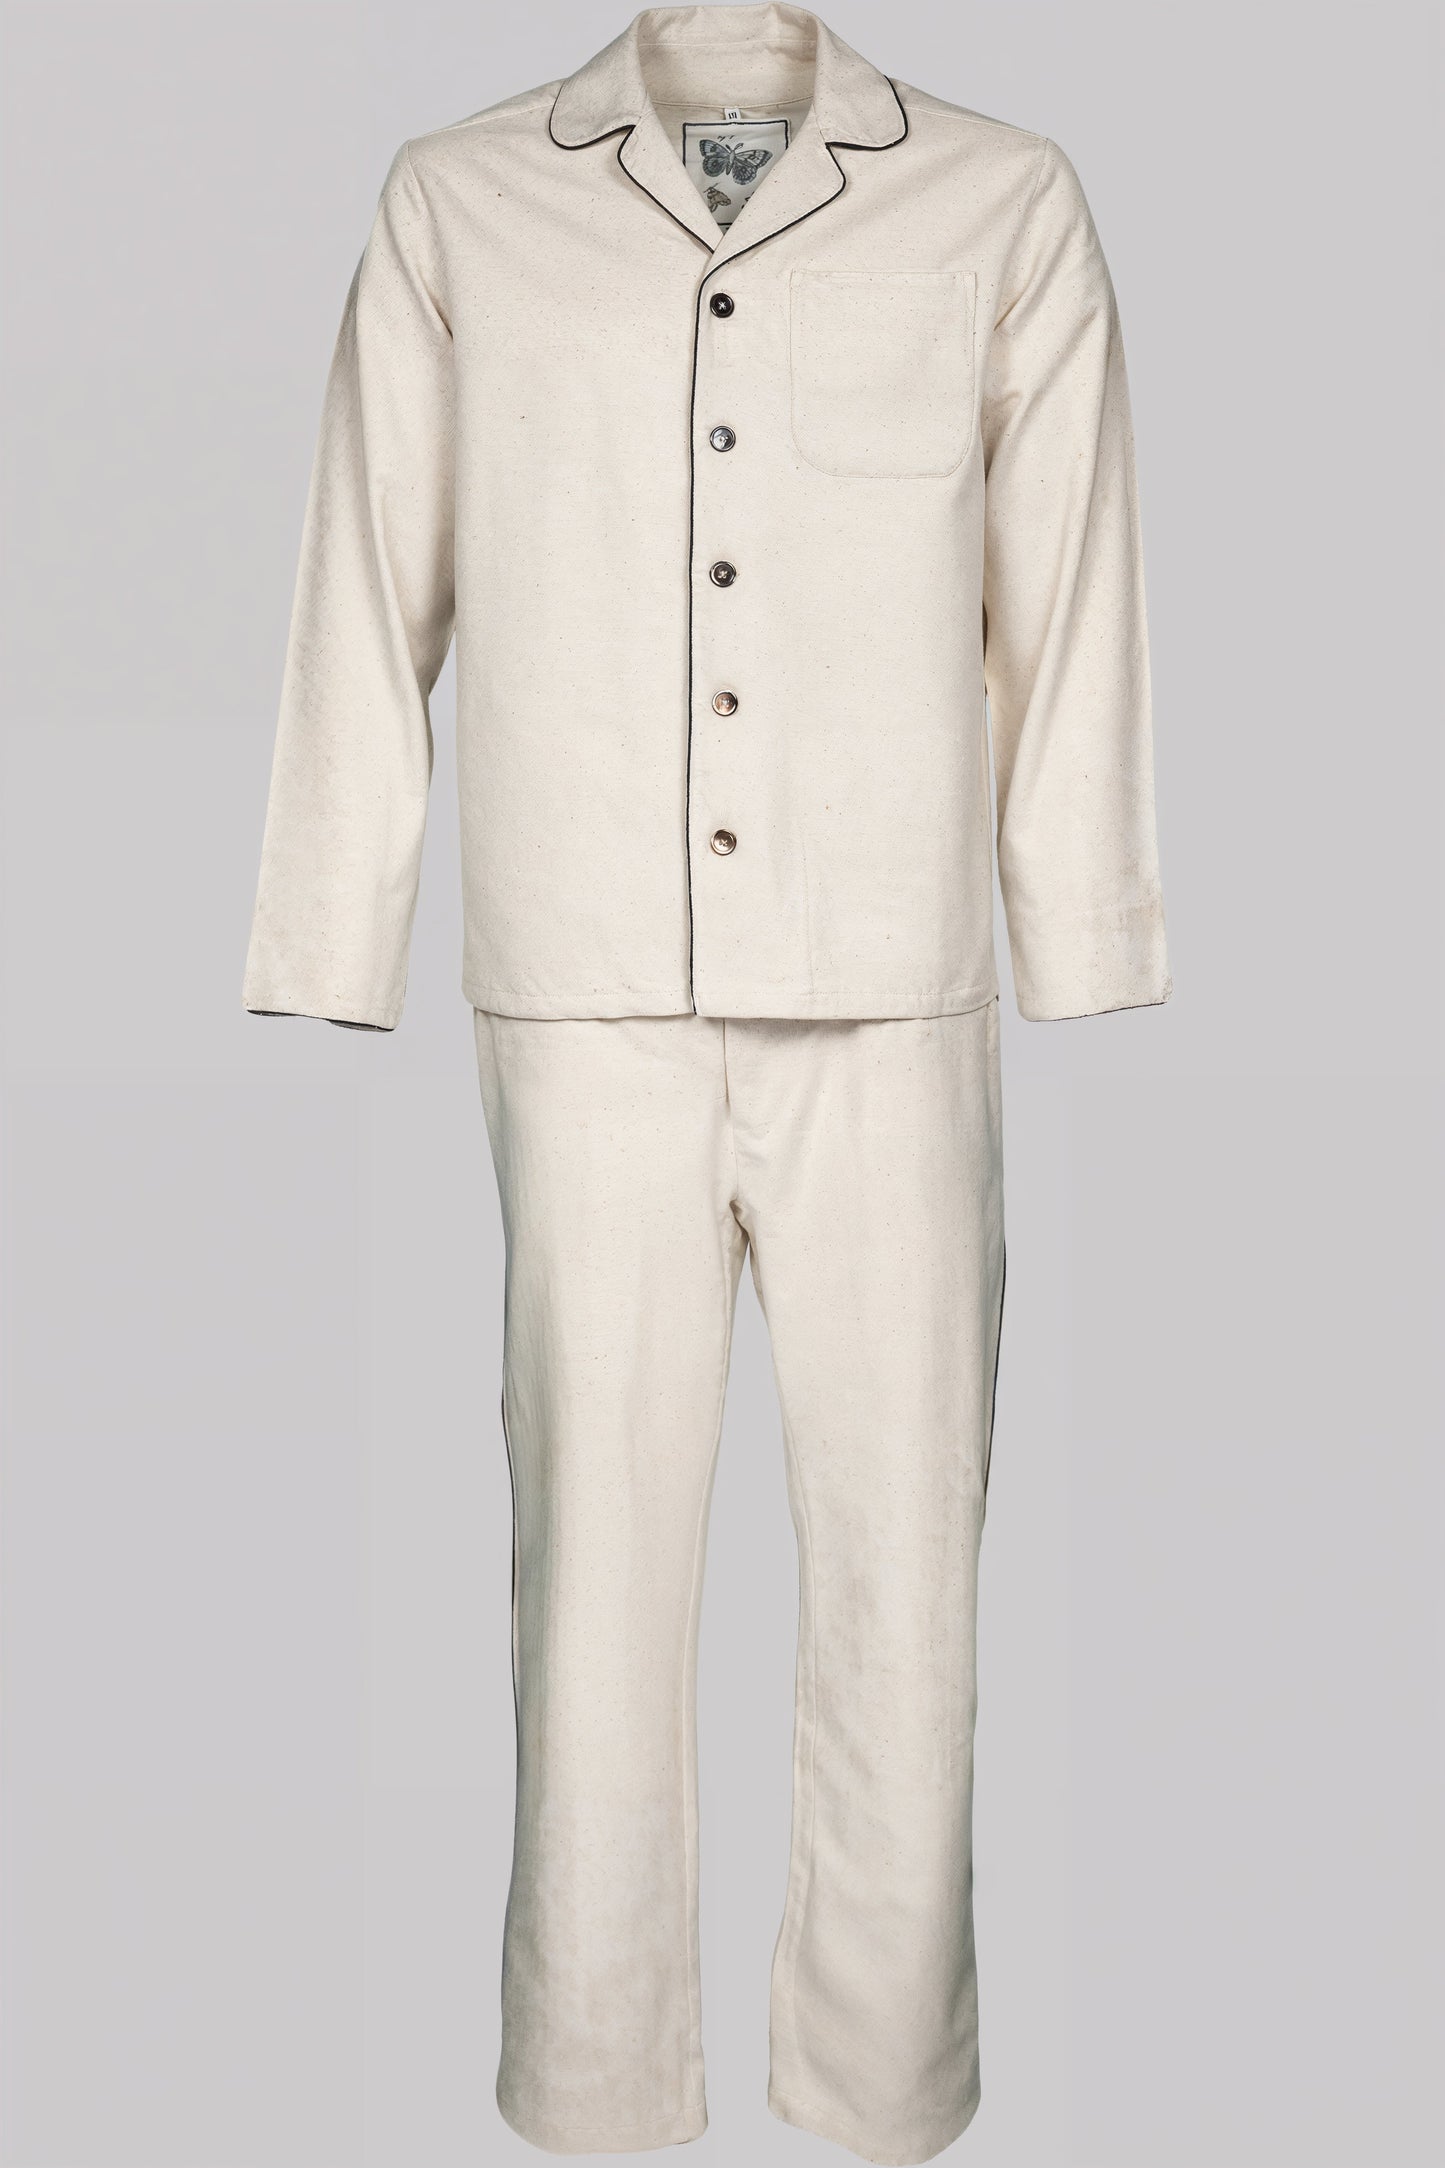 PYJAMA NATURAL with black braiding 100% COTTON Herringbone-Thick, Brushed-in/outside